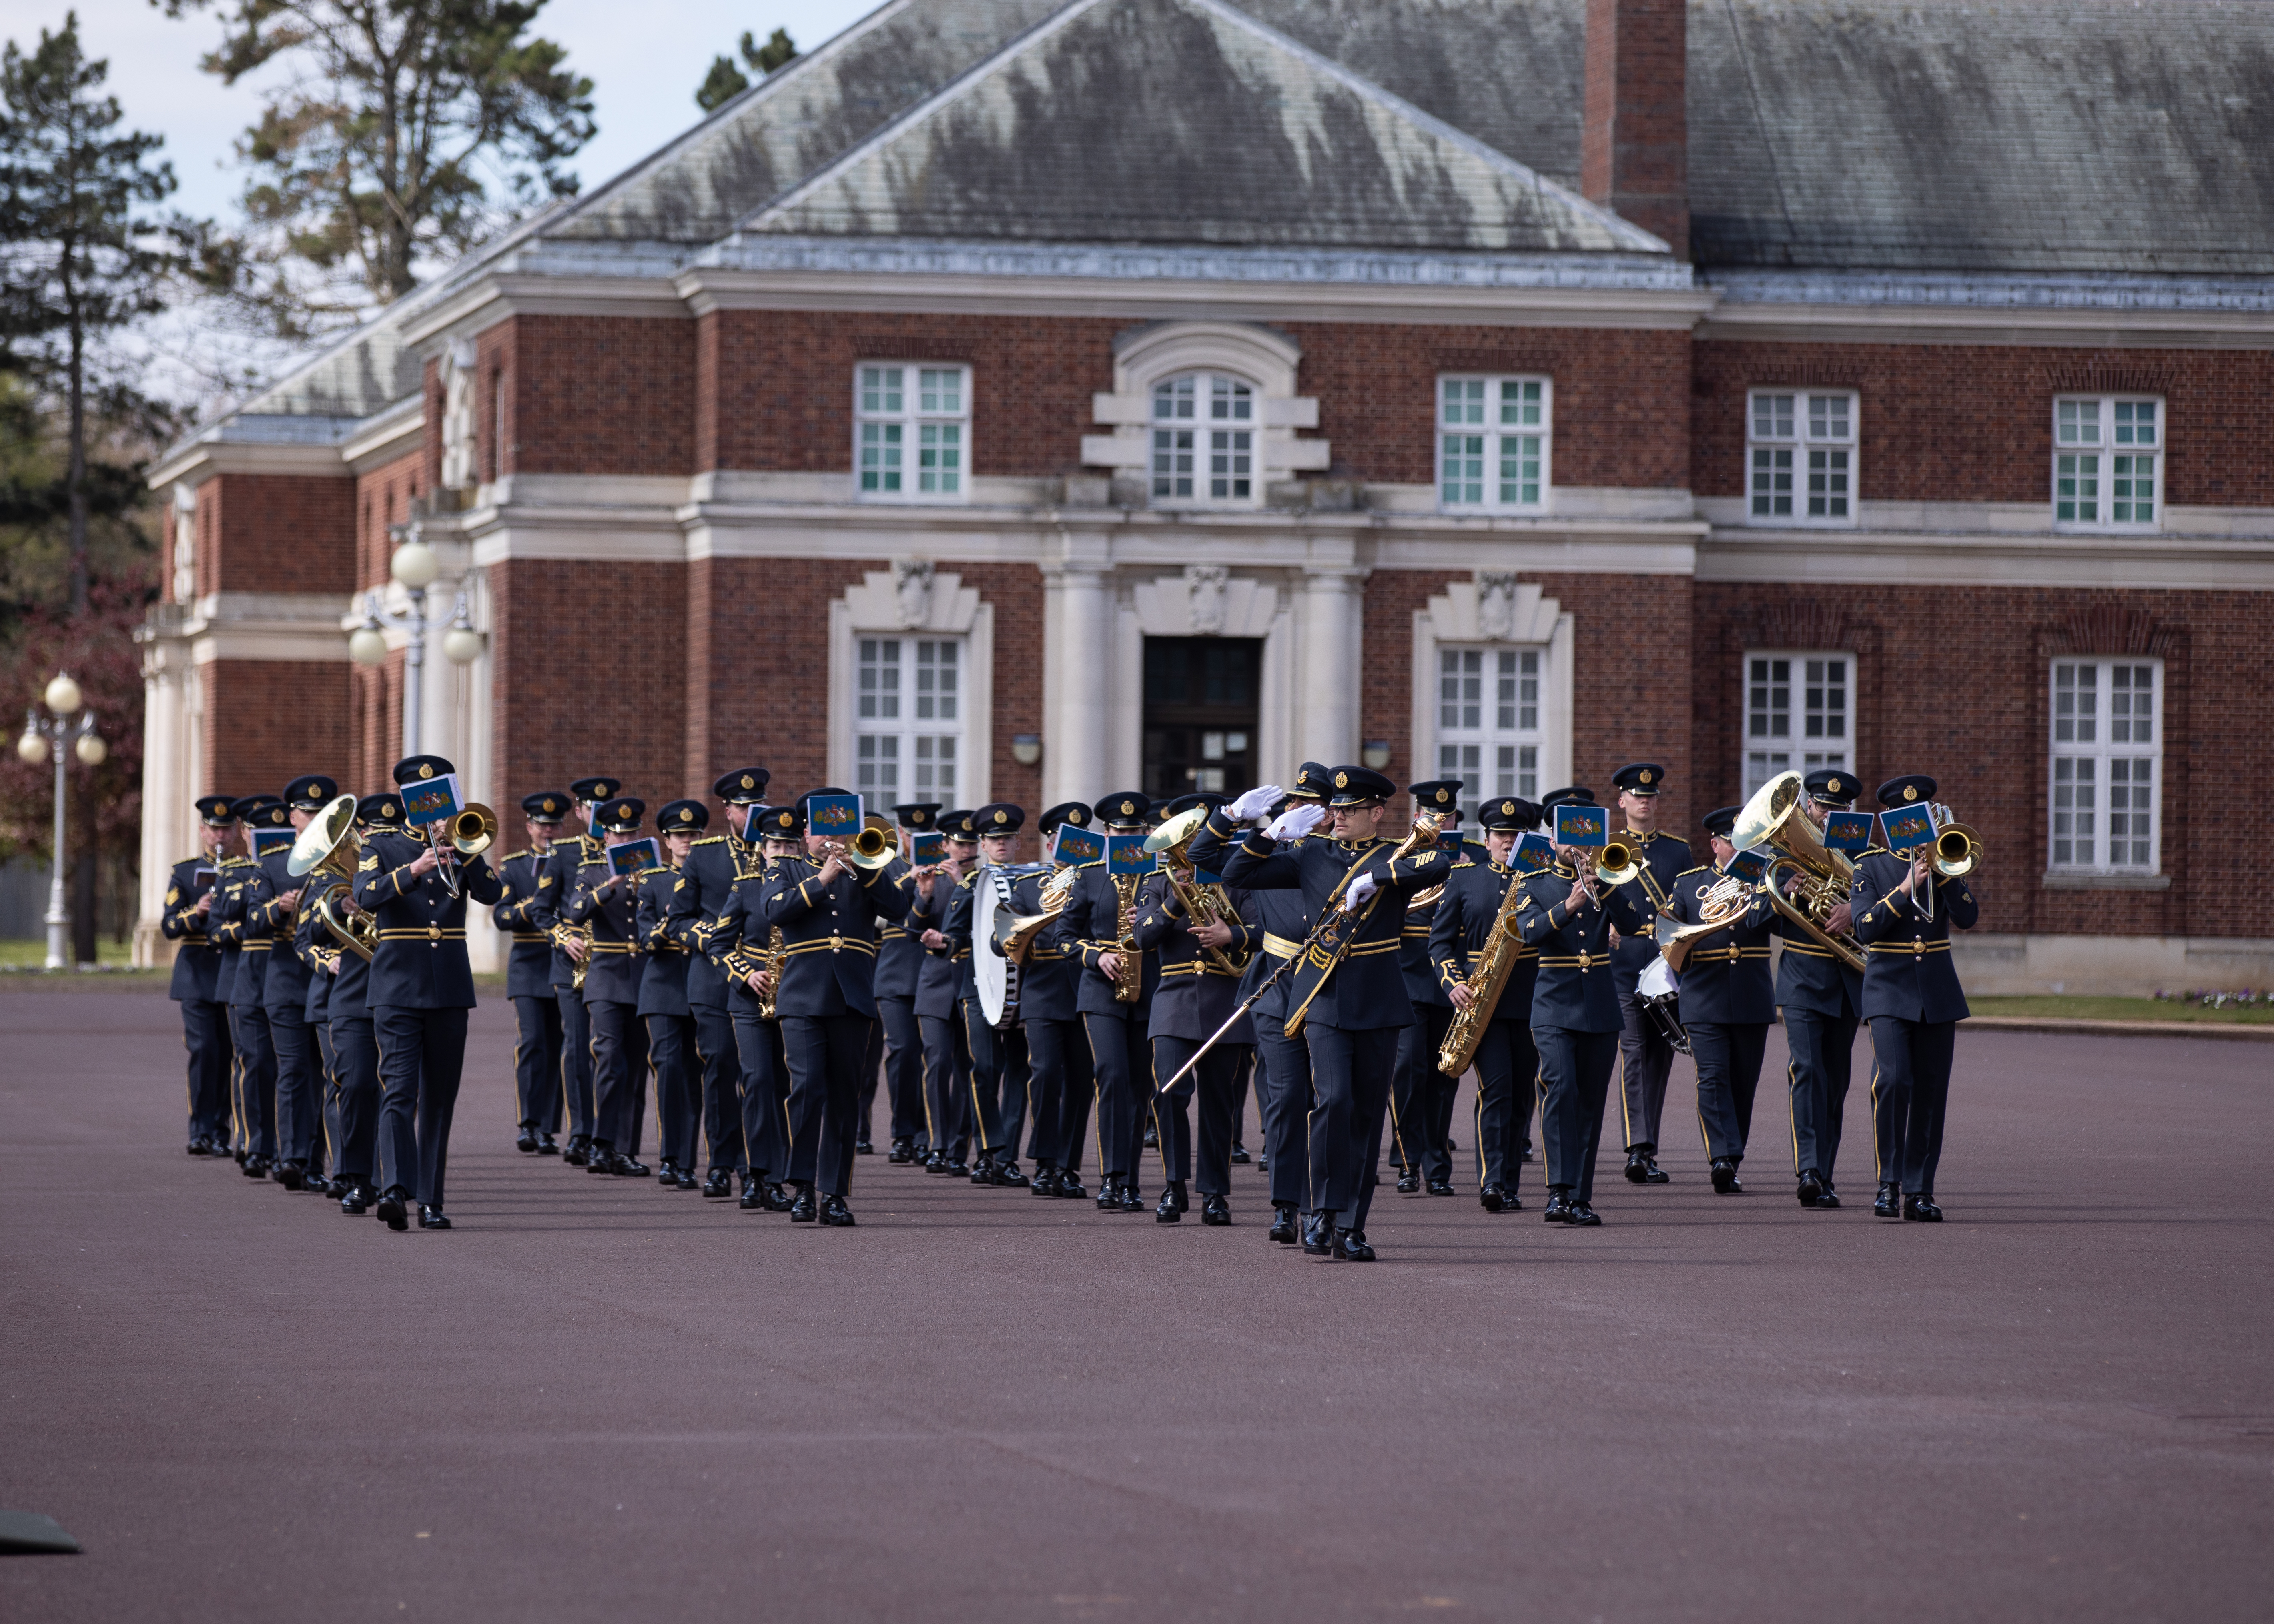 RAF Music Service personnel perform on parade.